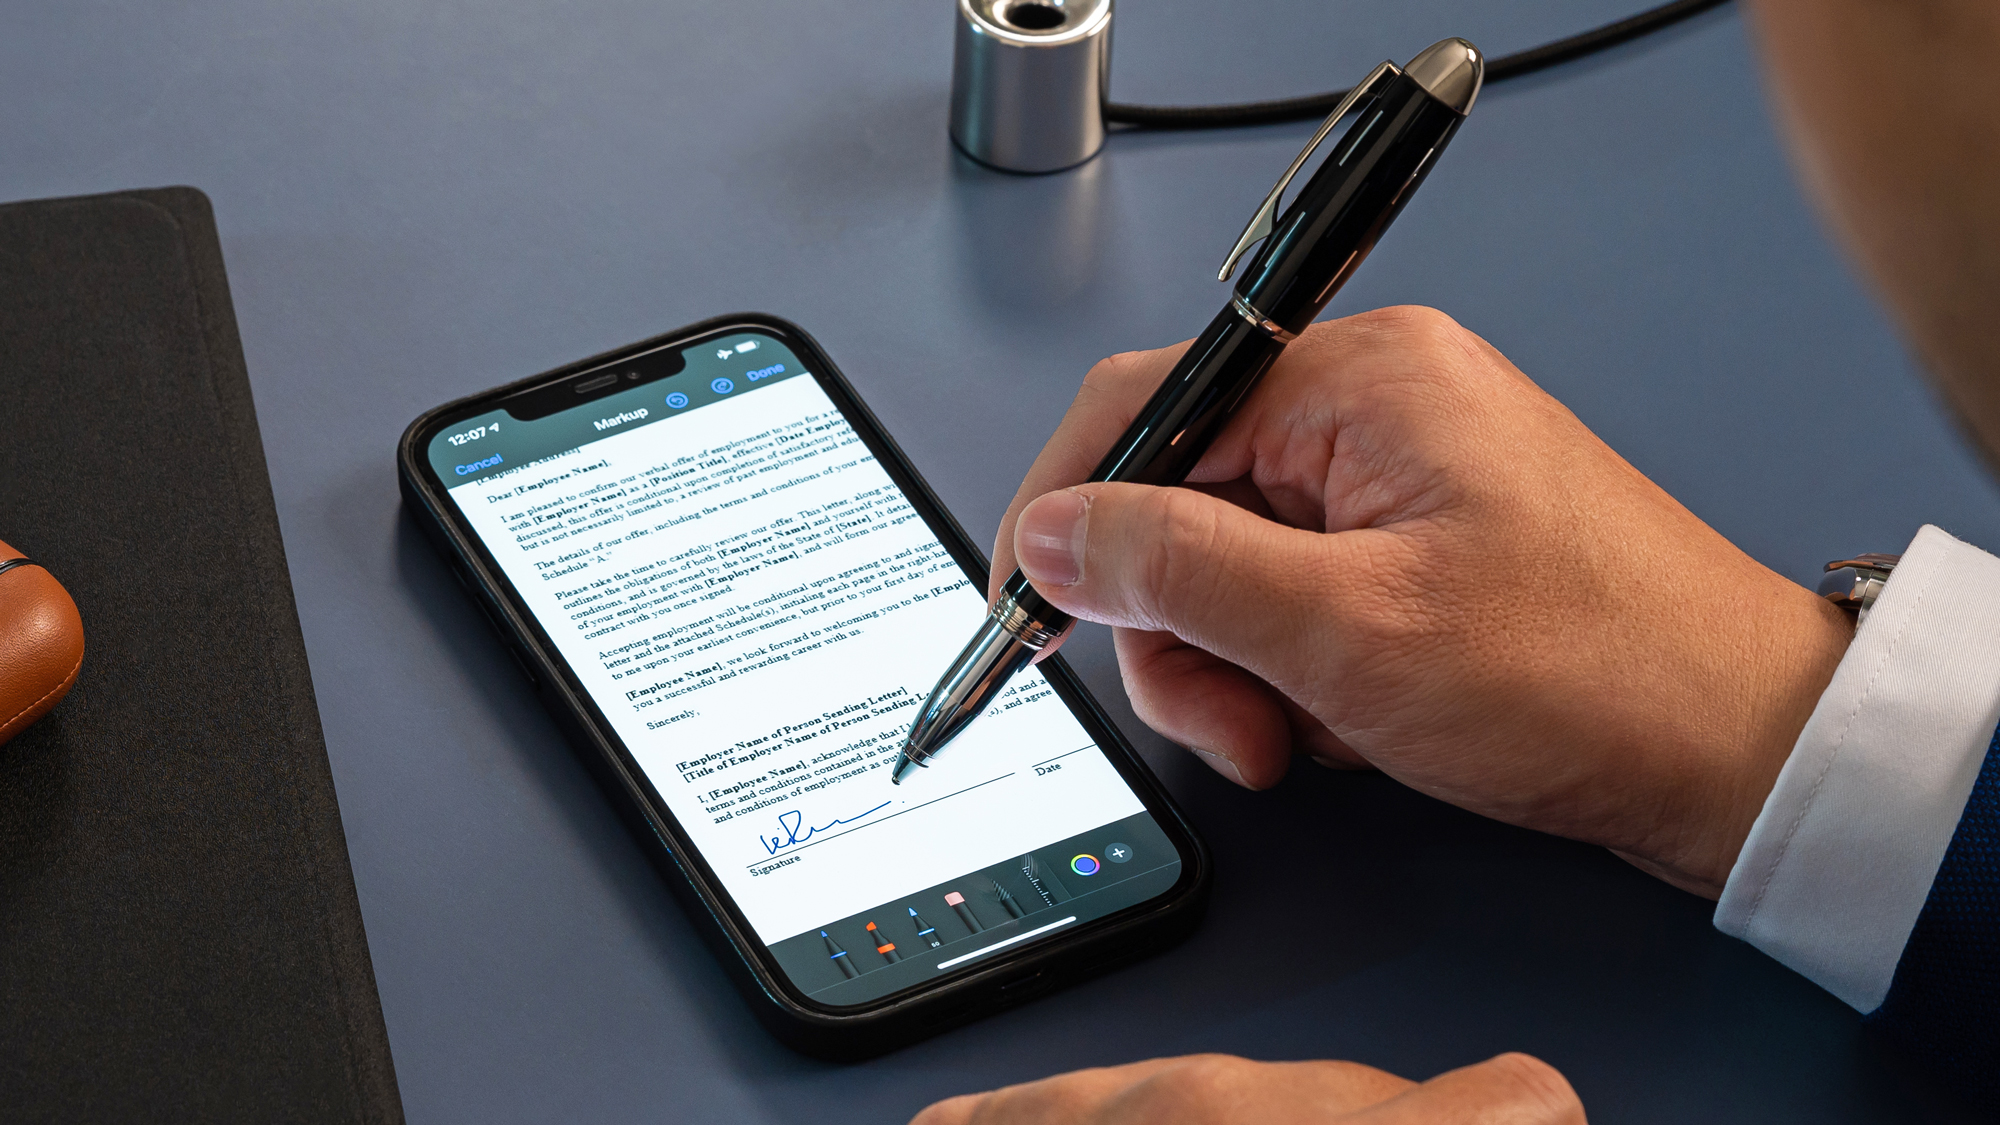 This $324 Stylus for iPhones and iPads Has Montblanc Style, but Isn’t Very Smart